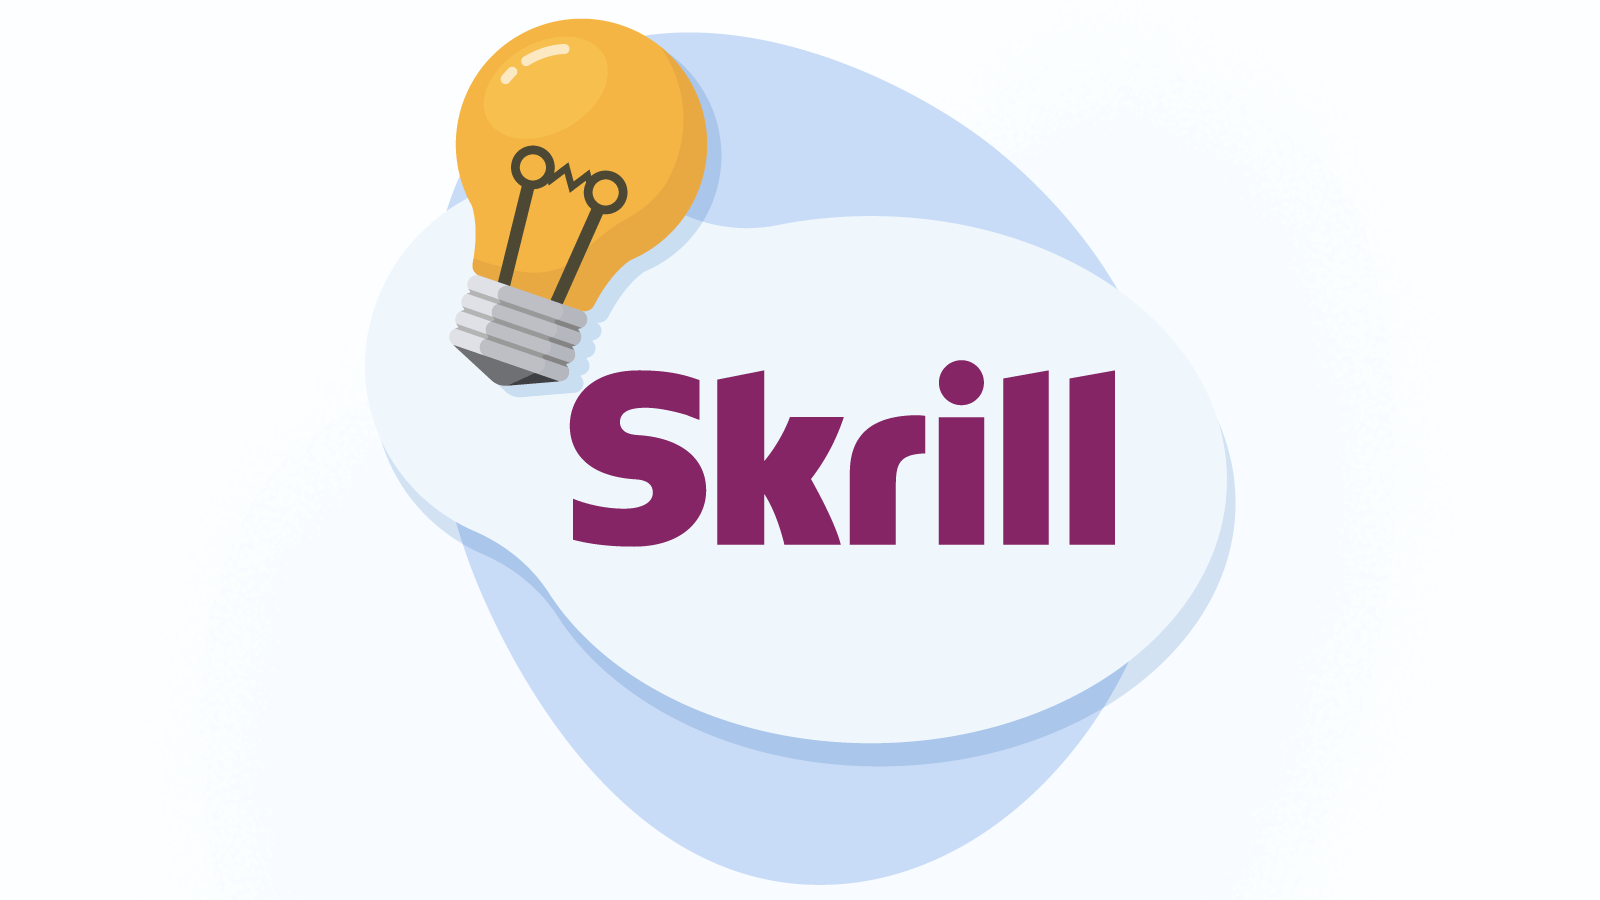 Why trust our selection of Skrill casinos